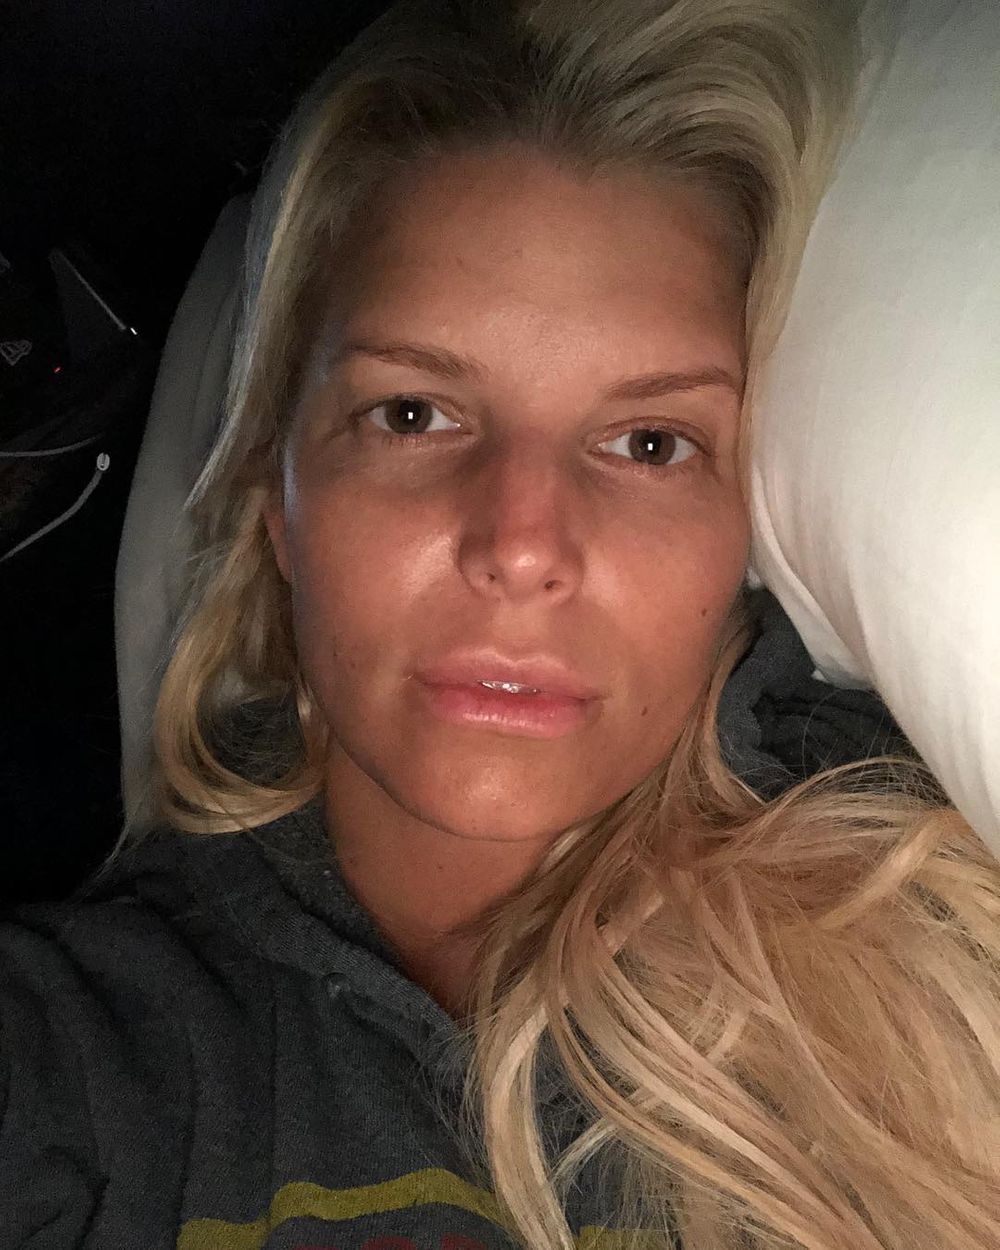 jessica simpson admits to having 2 tummy tucks: 'i couldn't bear to look at myself'